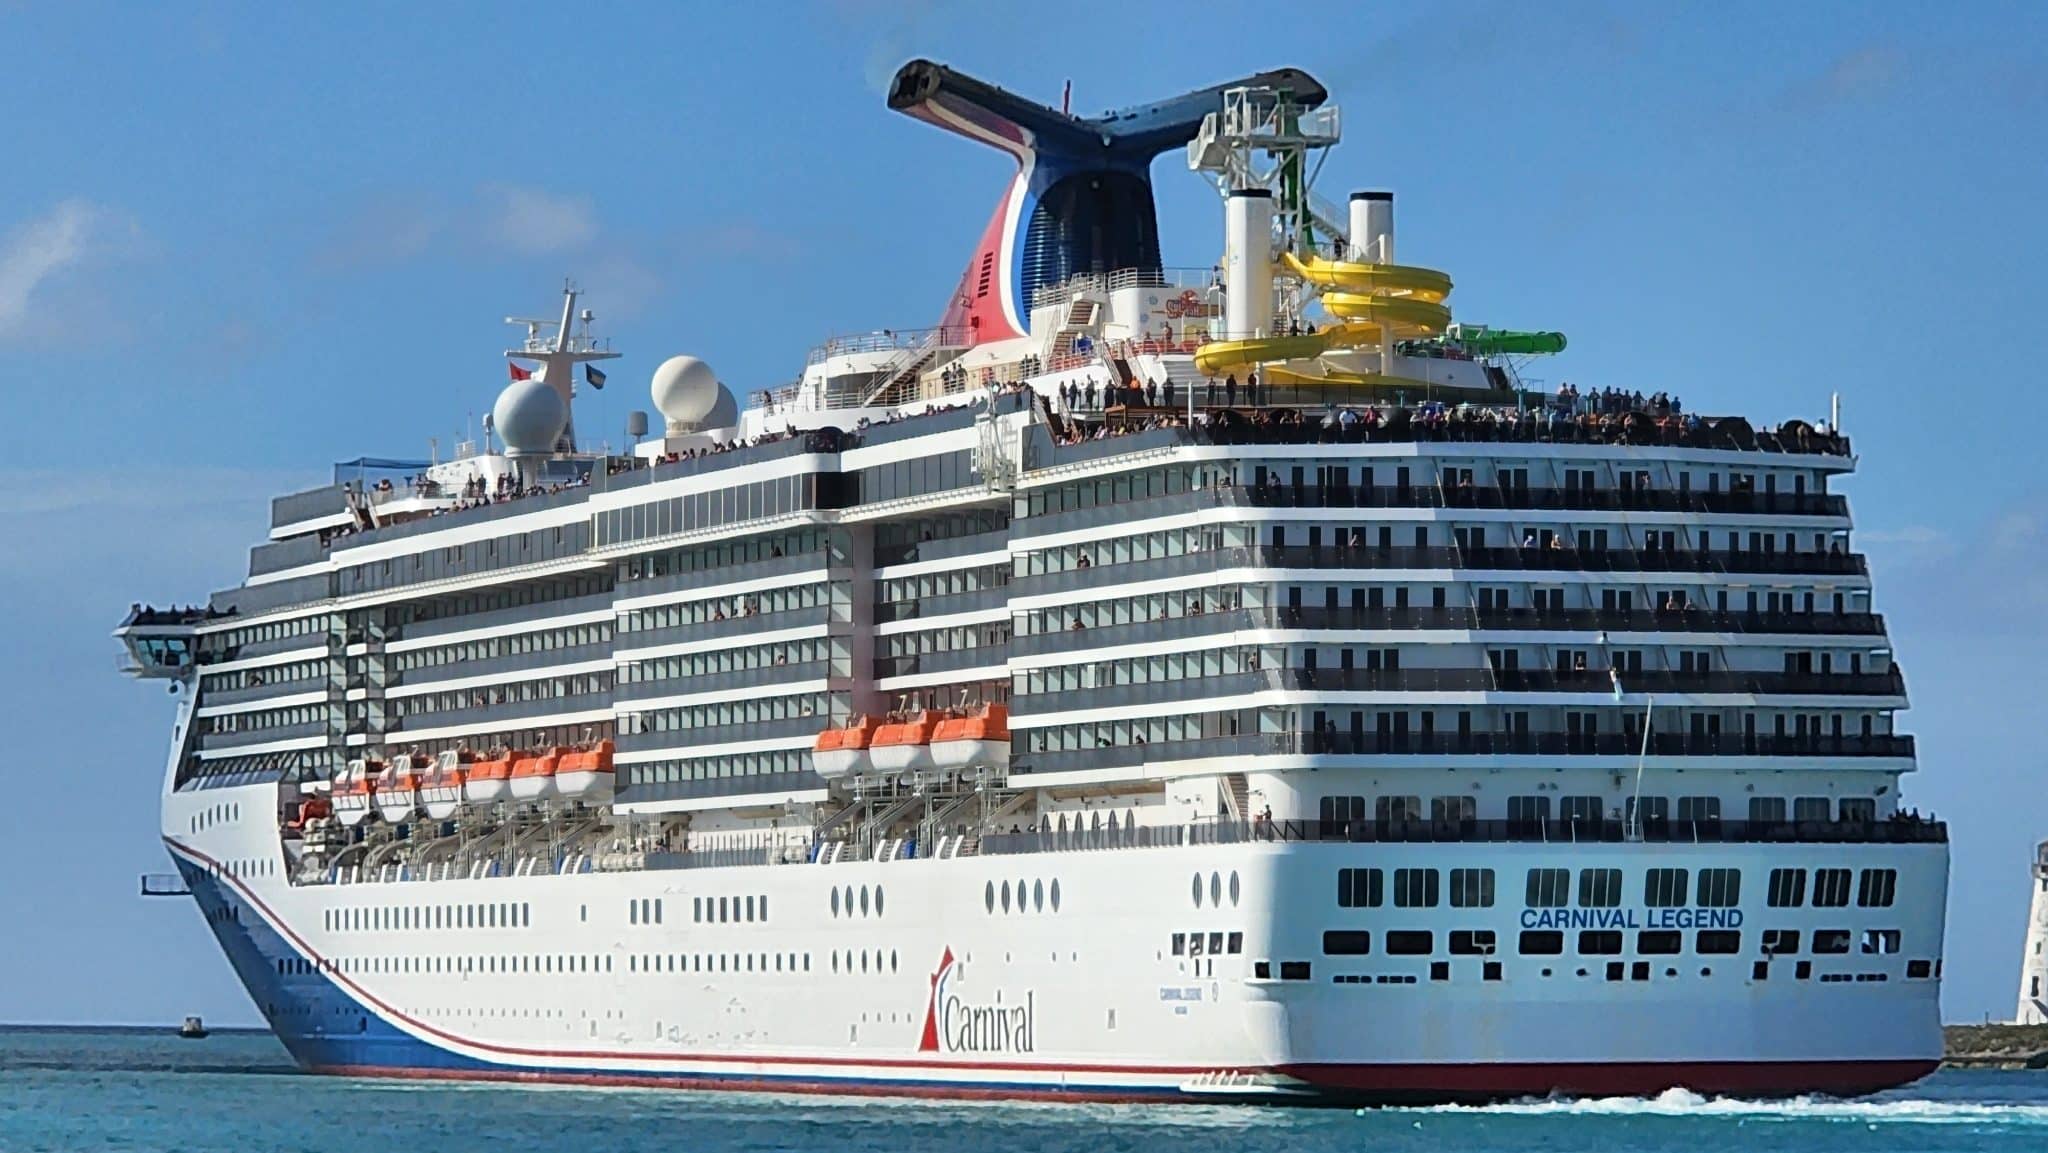 carnival cruise discount for shareholders